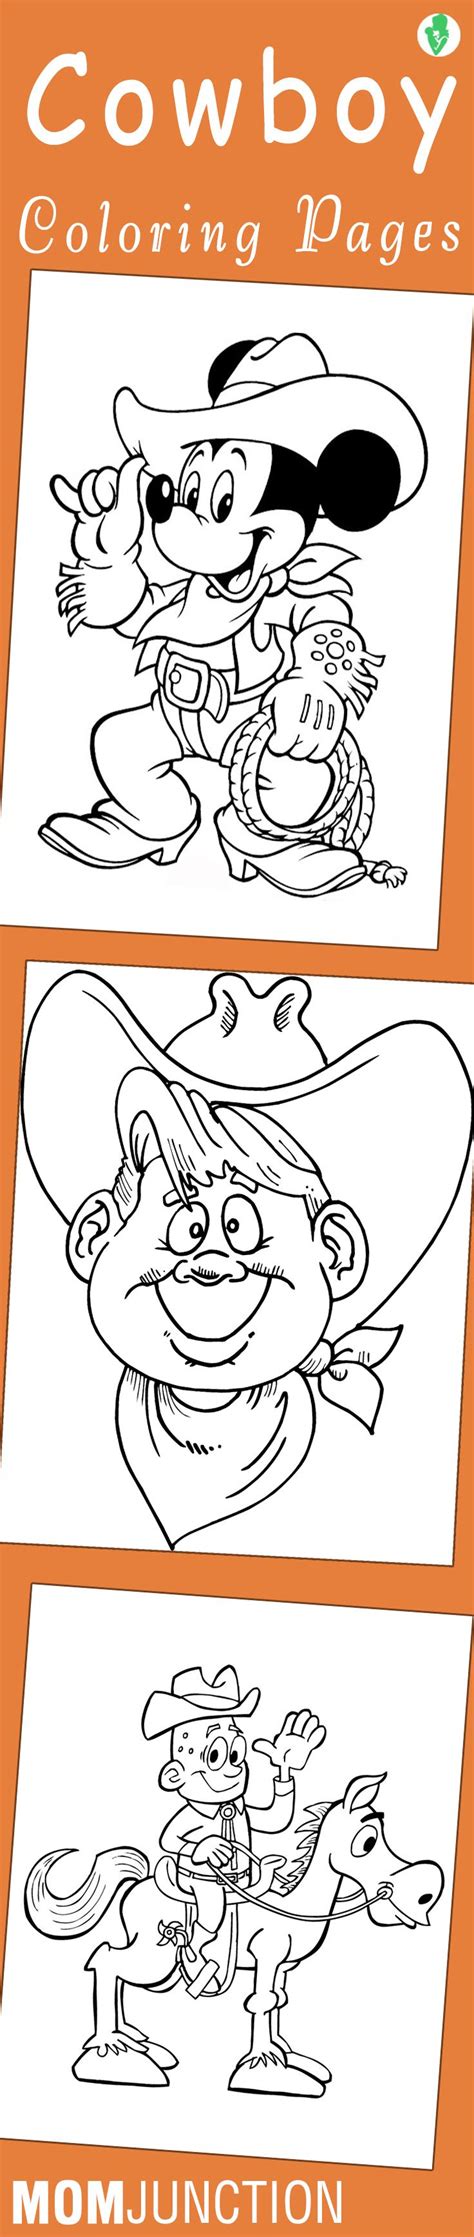 top   printabe cowboy coloring pages  coloring pages cowboy crafts wild west theme